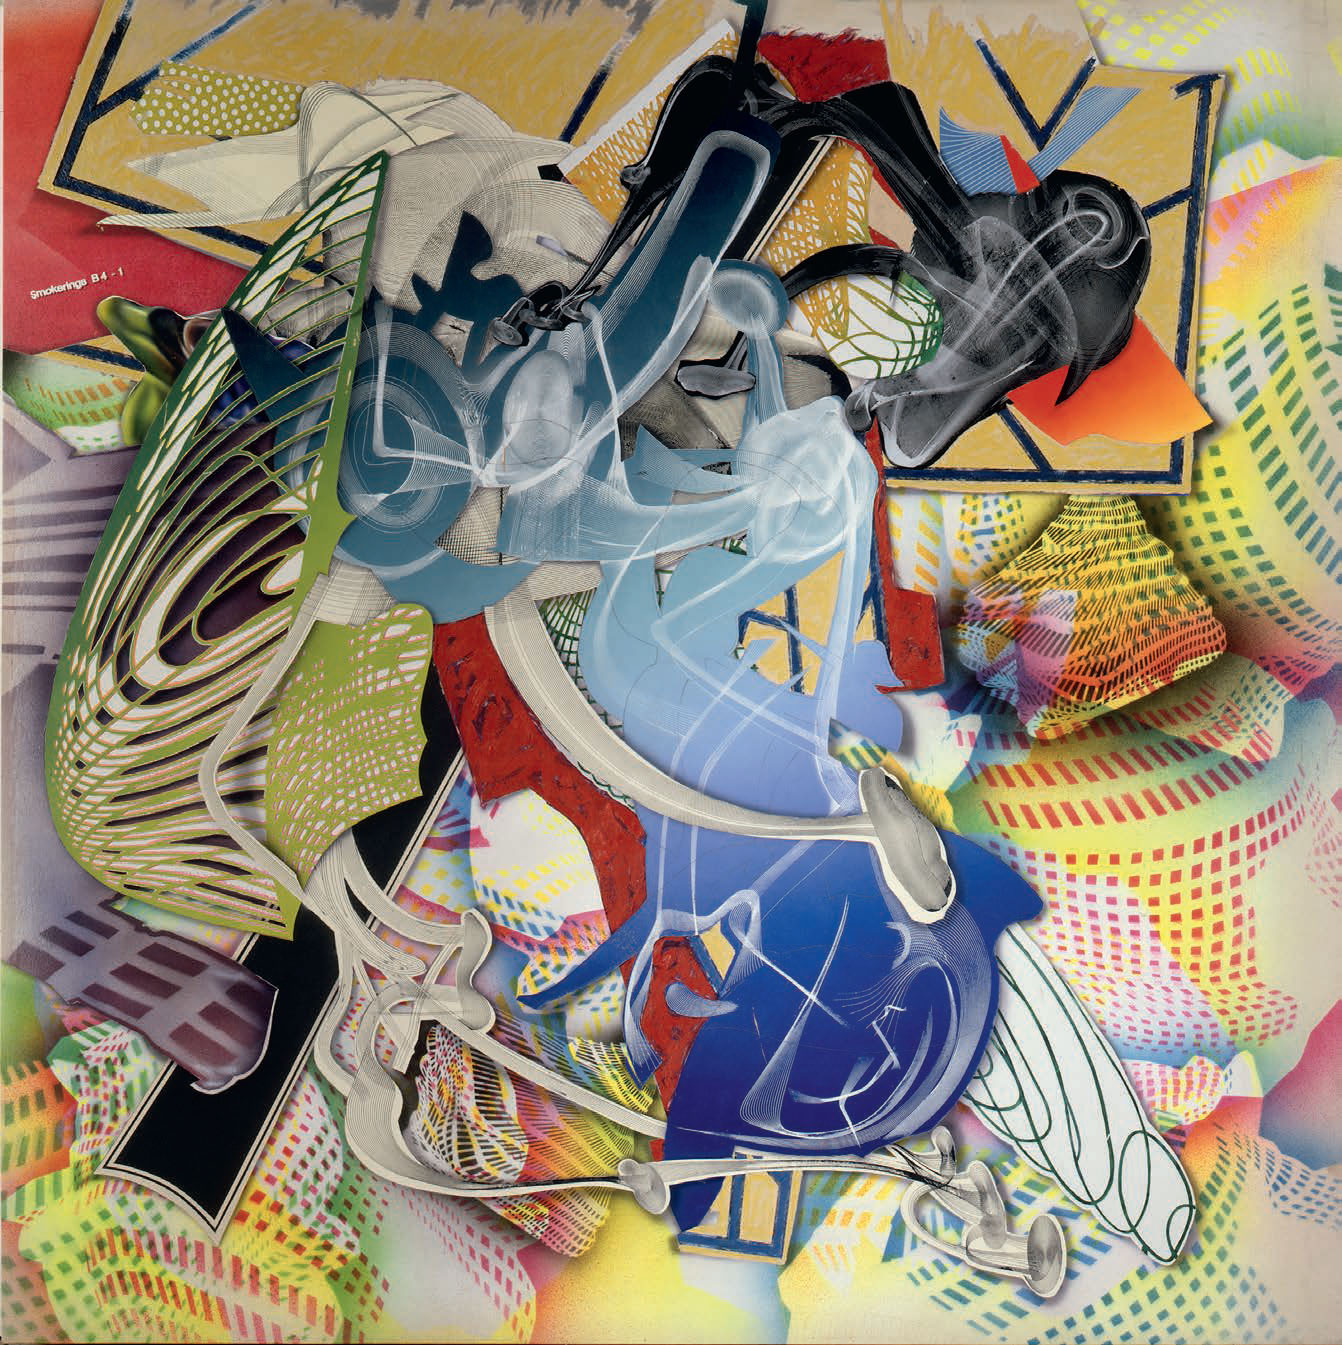 Cantahar (1998) by Frank Stella. From the artist's Imaginary Places series